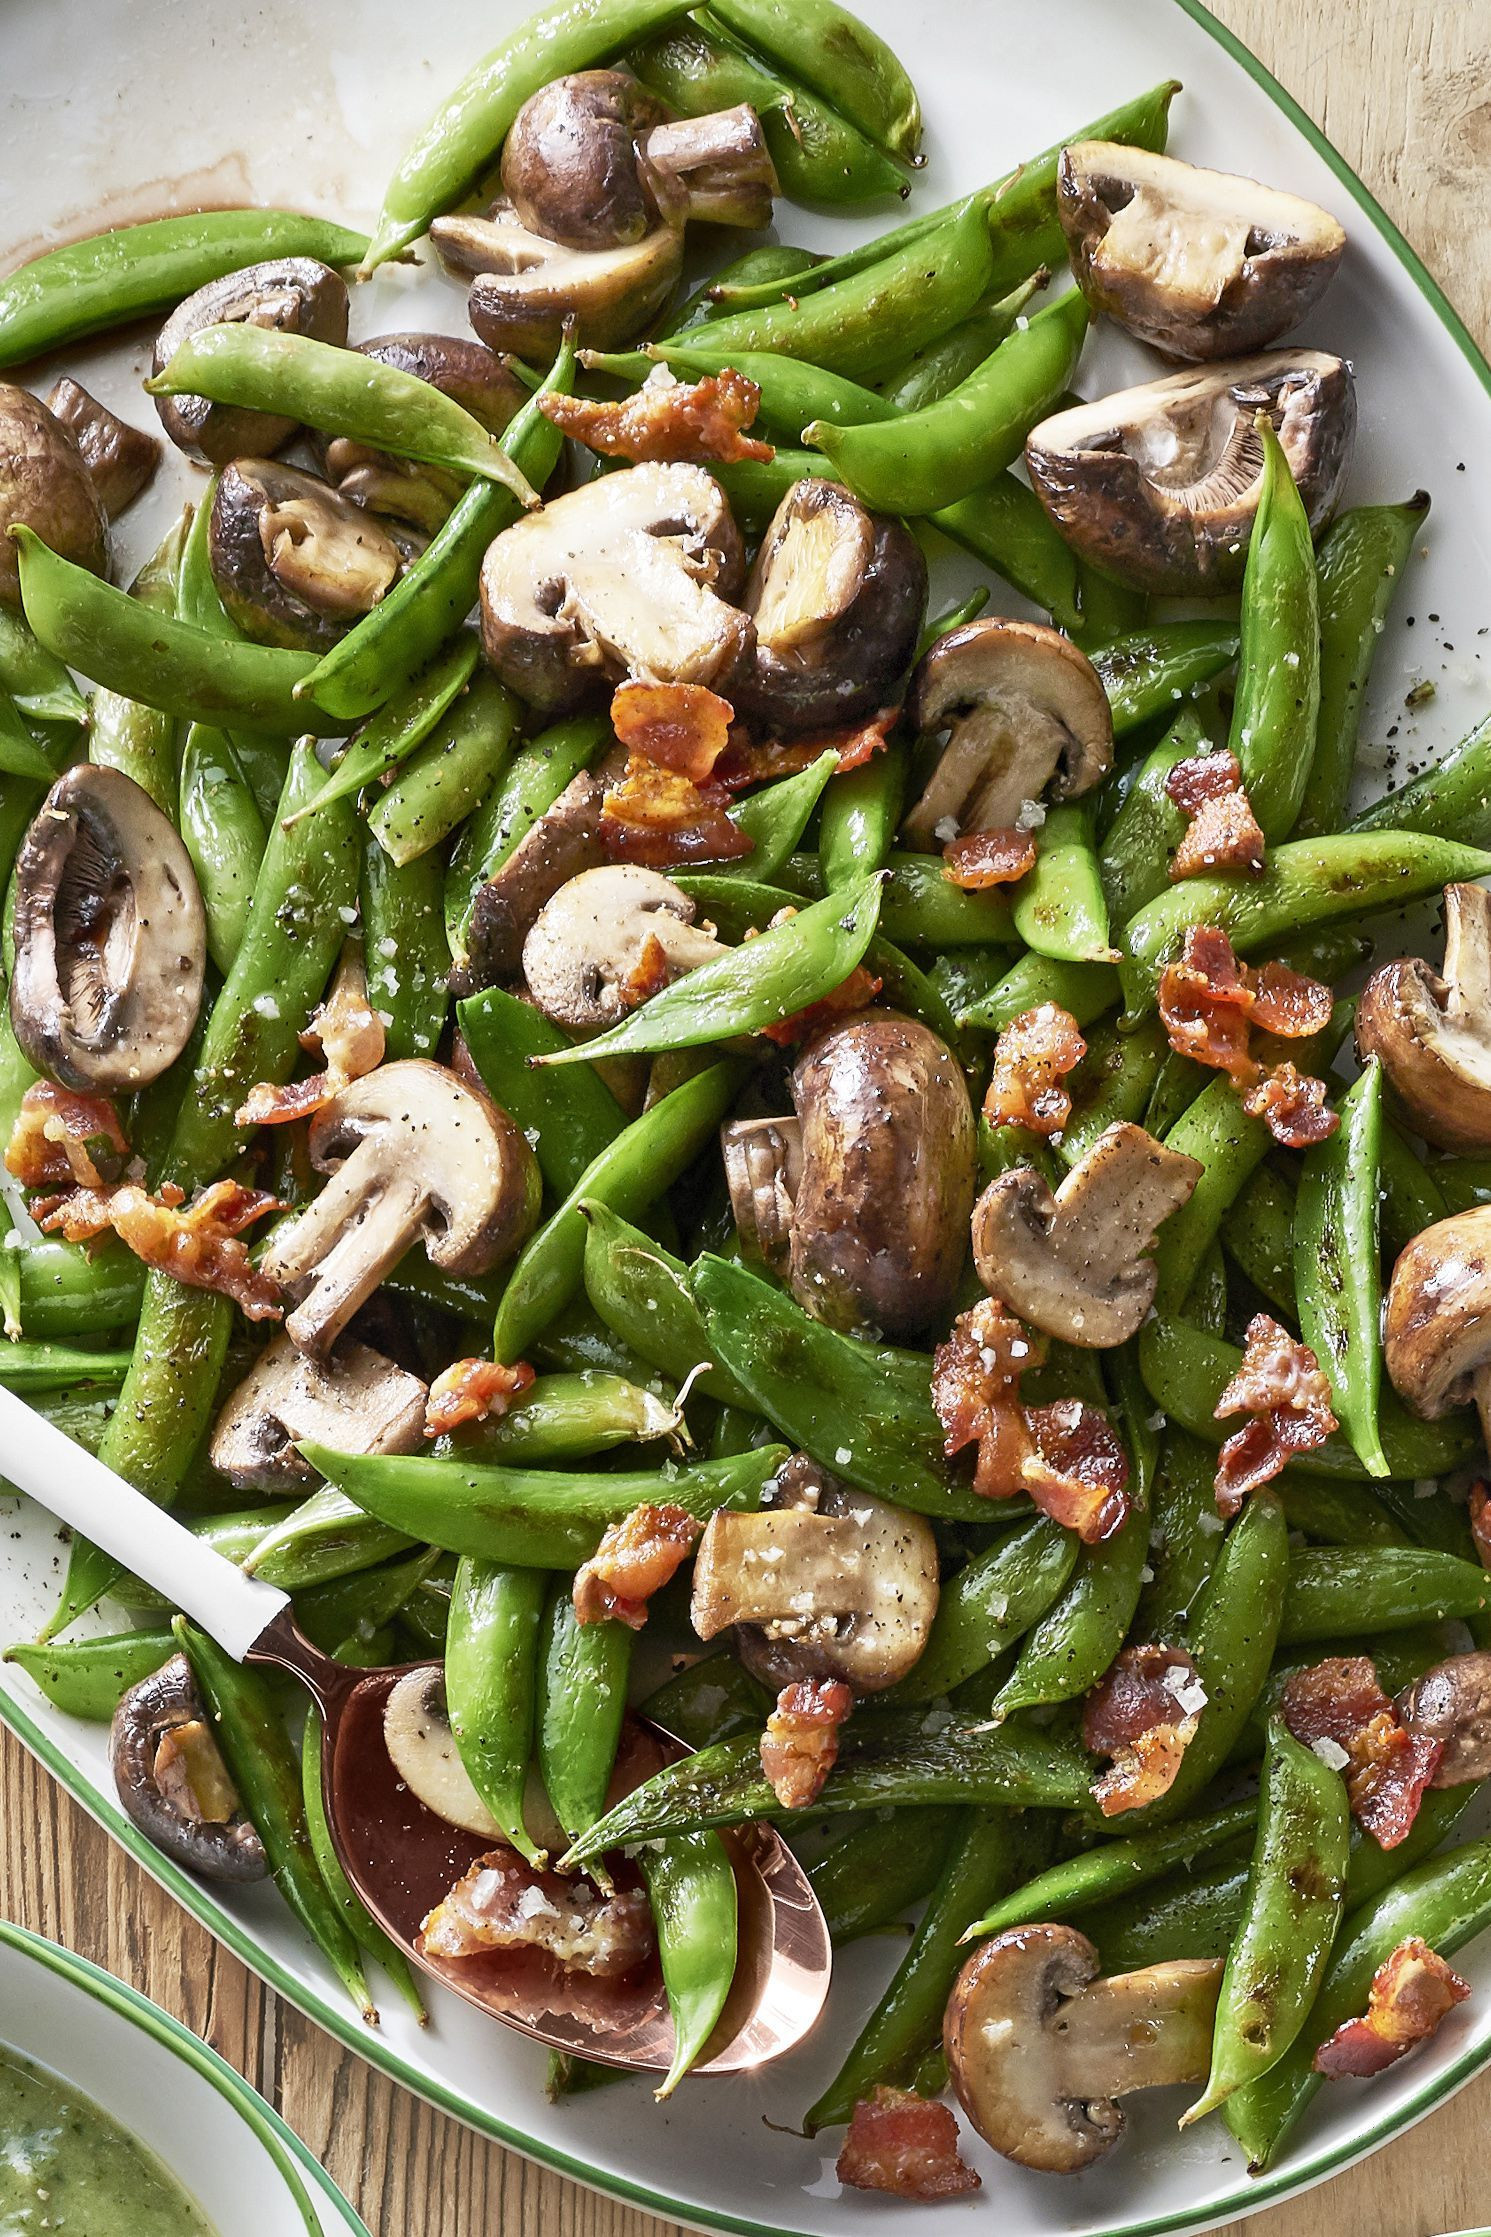 Vegetable Recipes For Easter Dinner
 These Easter Side Dishes Are Bound to Upstage Your Ham